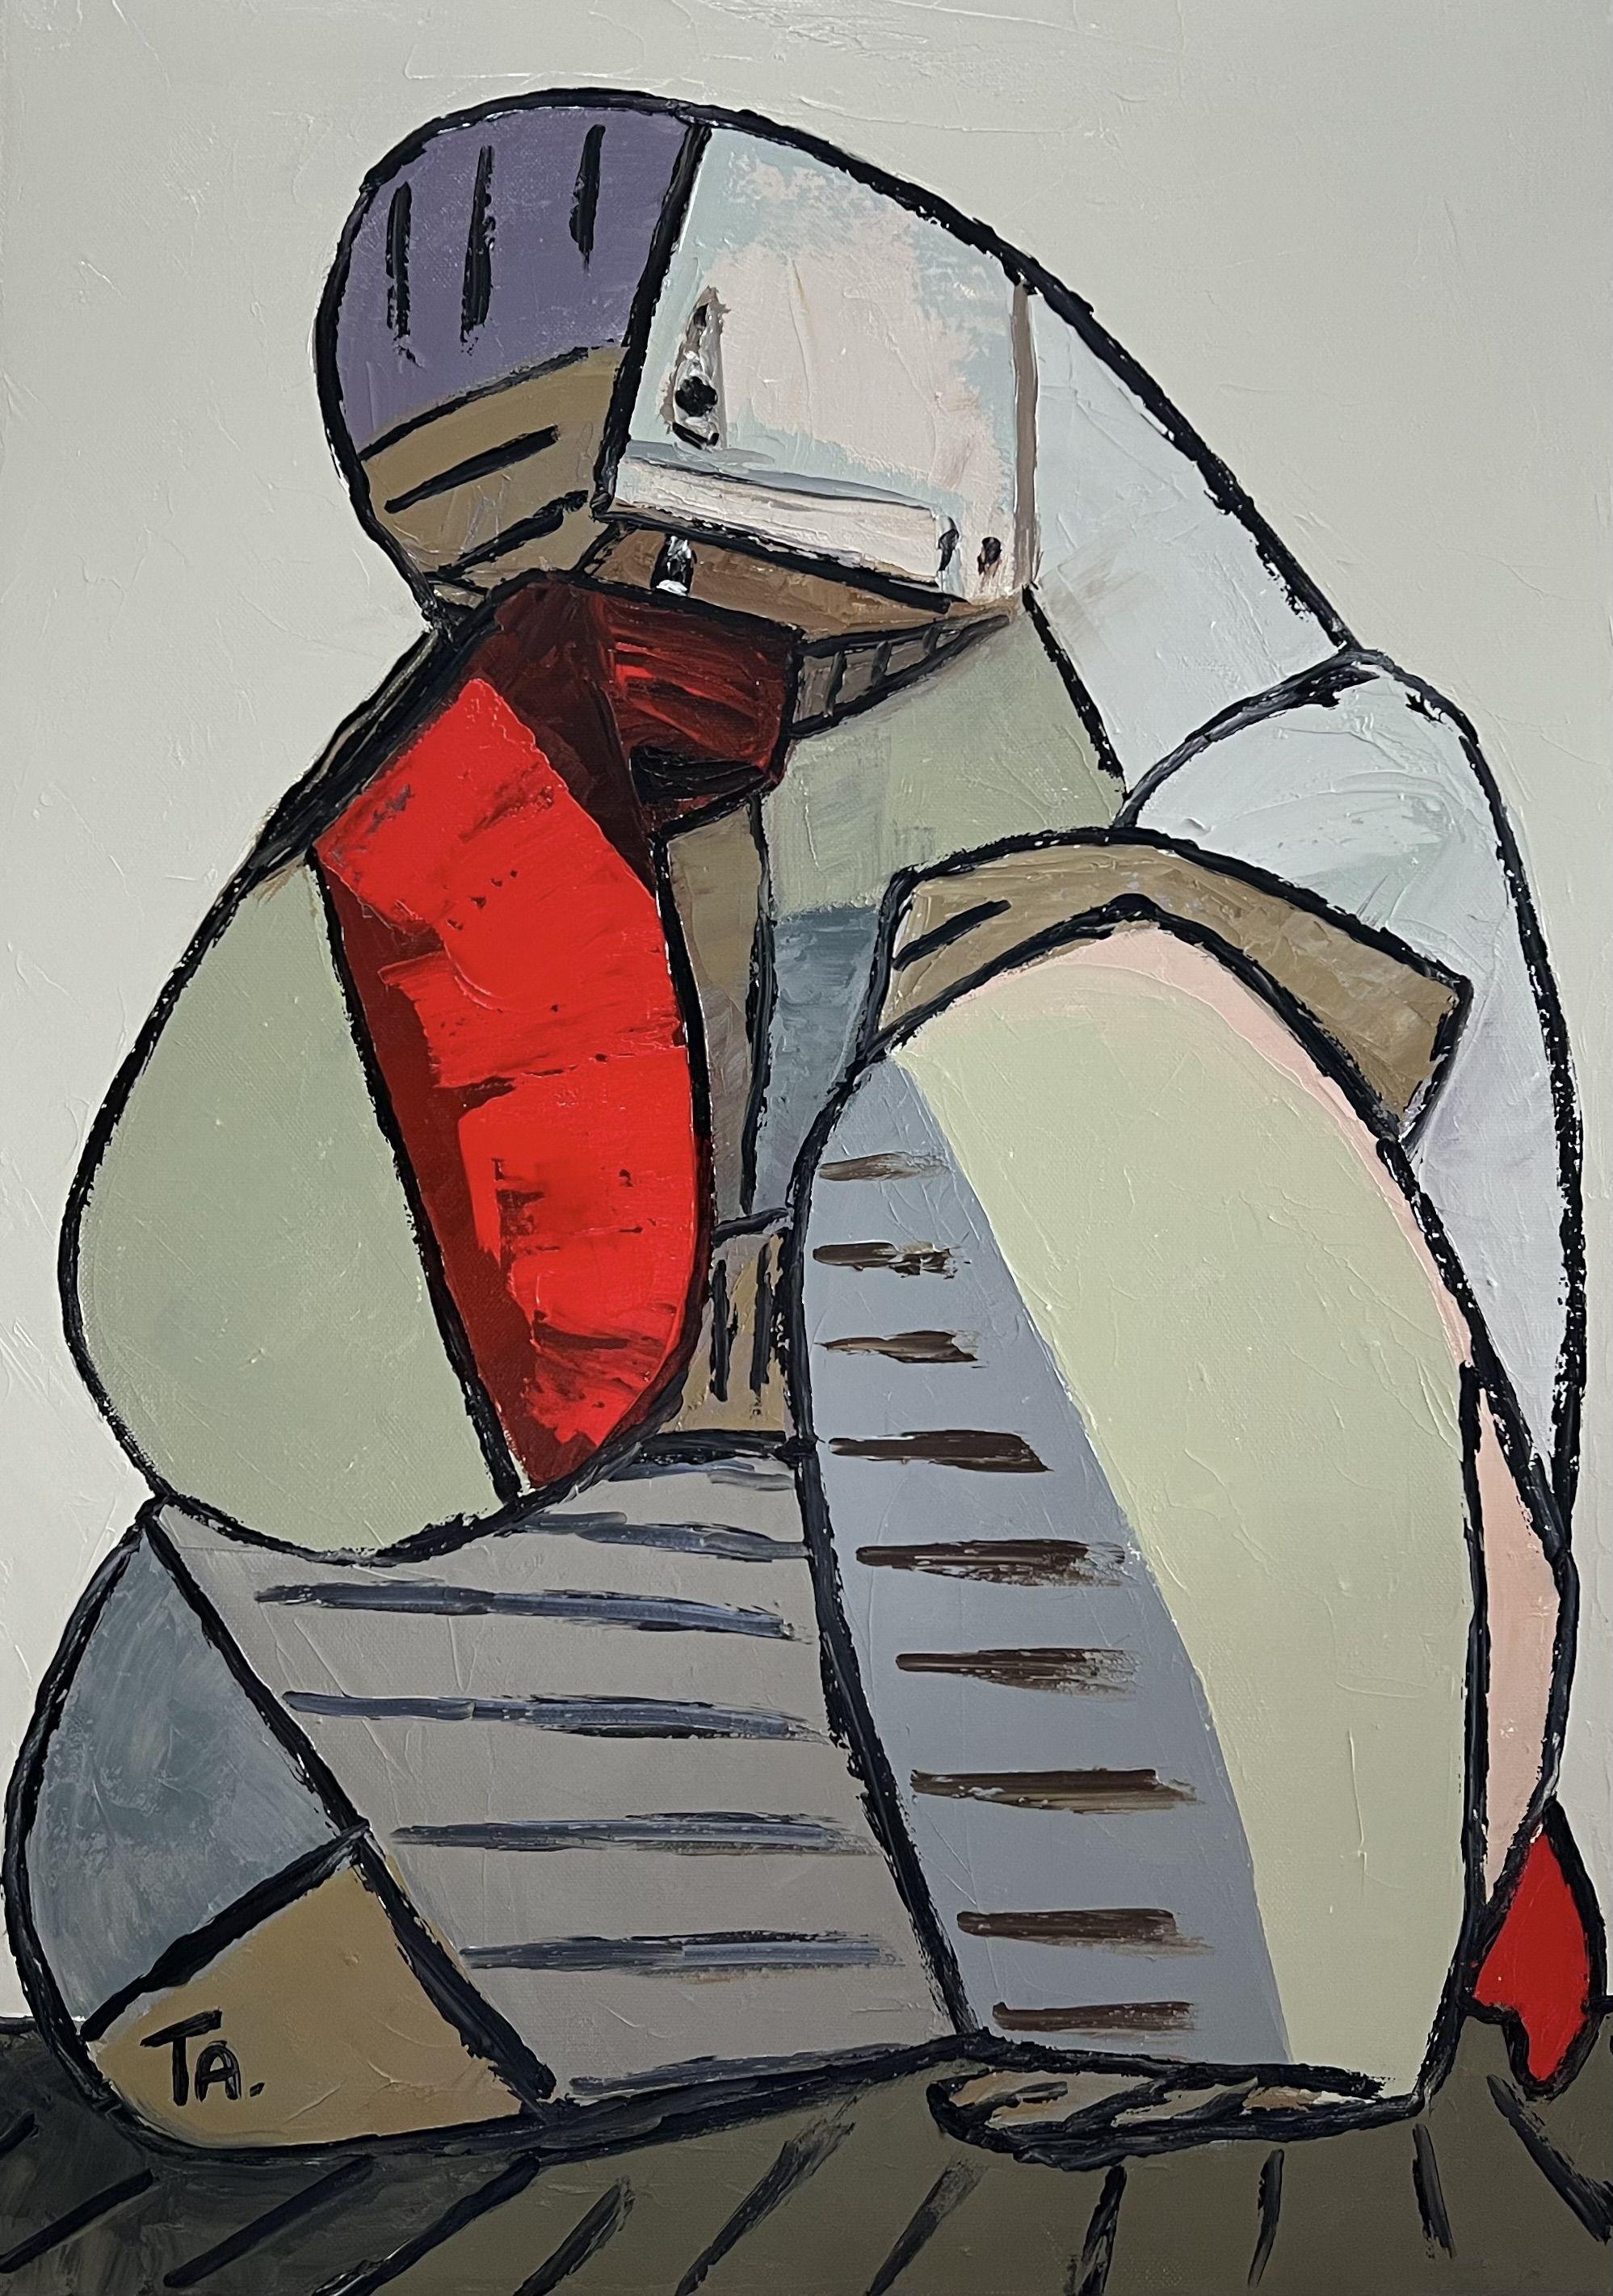 Ta Byrne Abstract Painting - The Thinker, Painting, Oil on Canvas